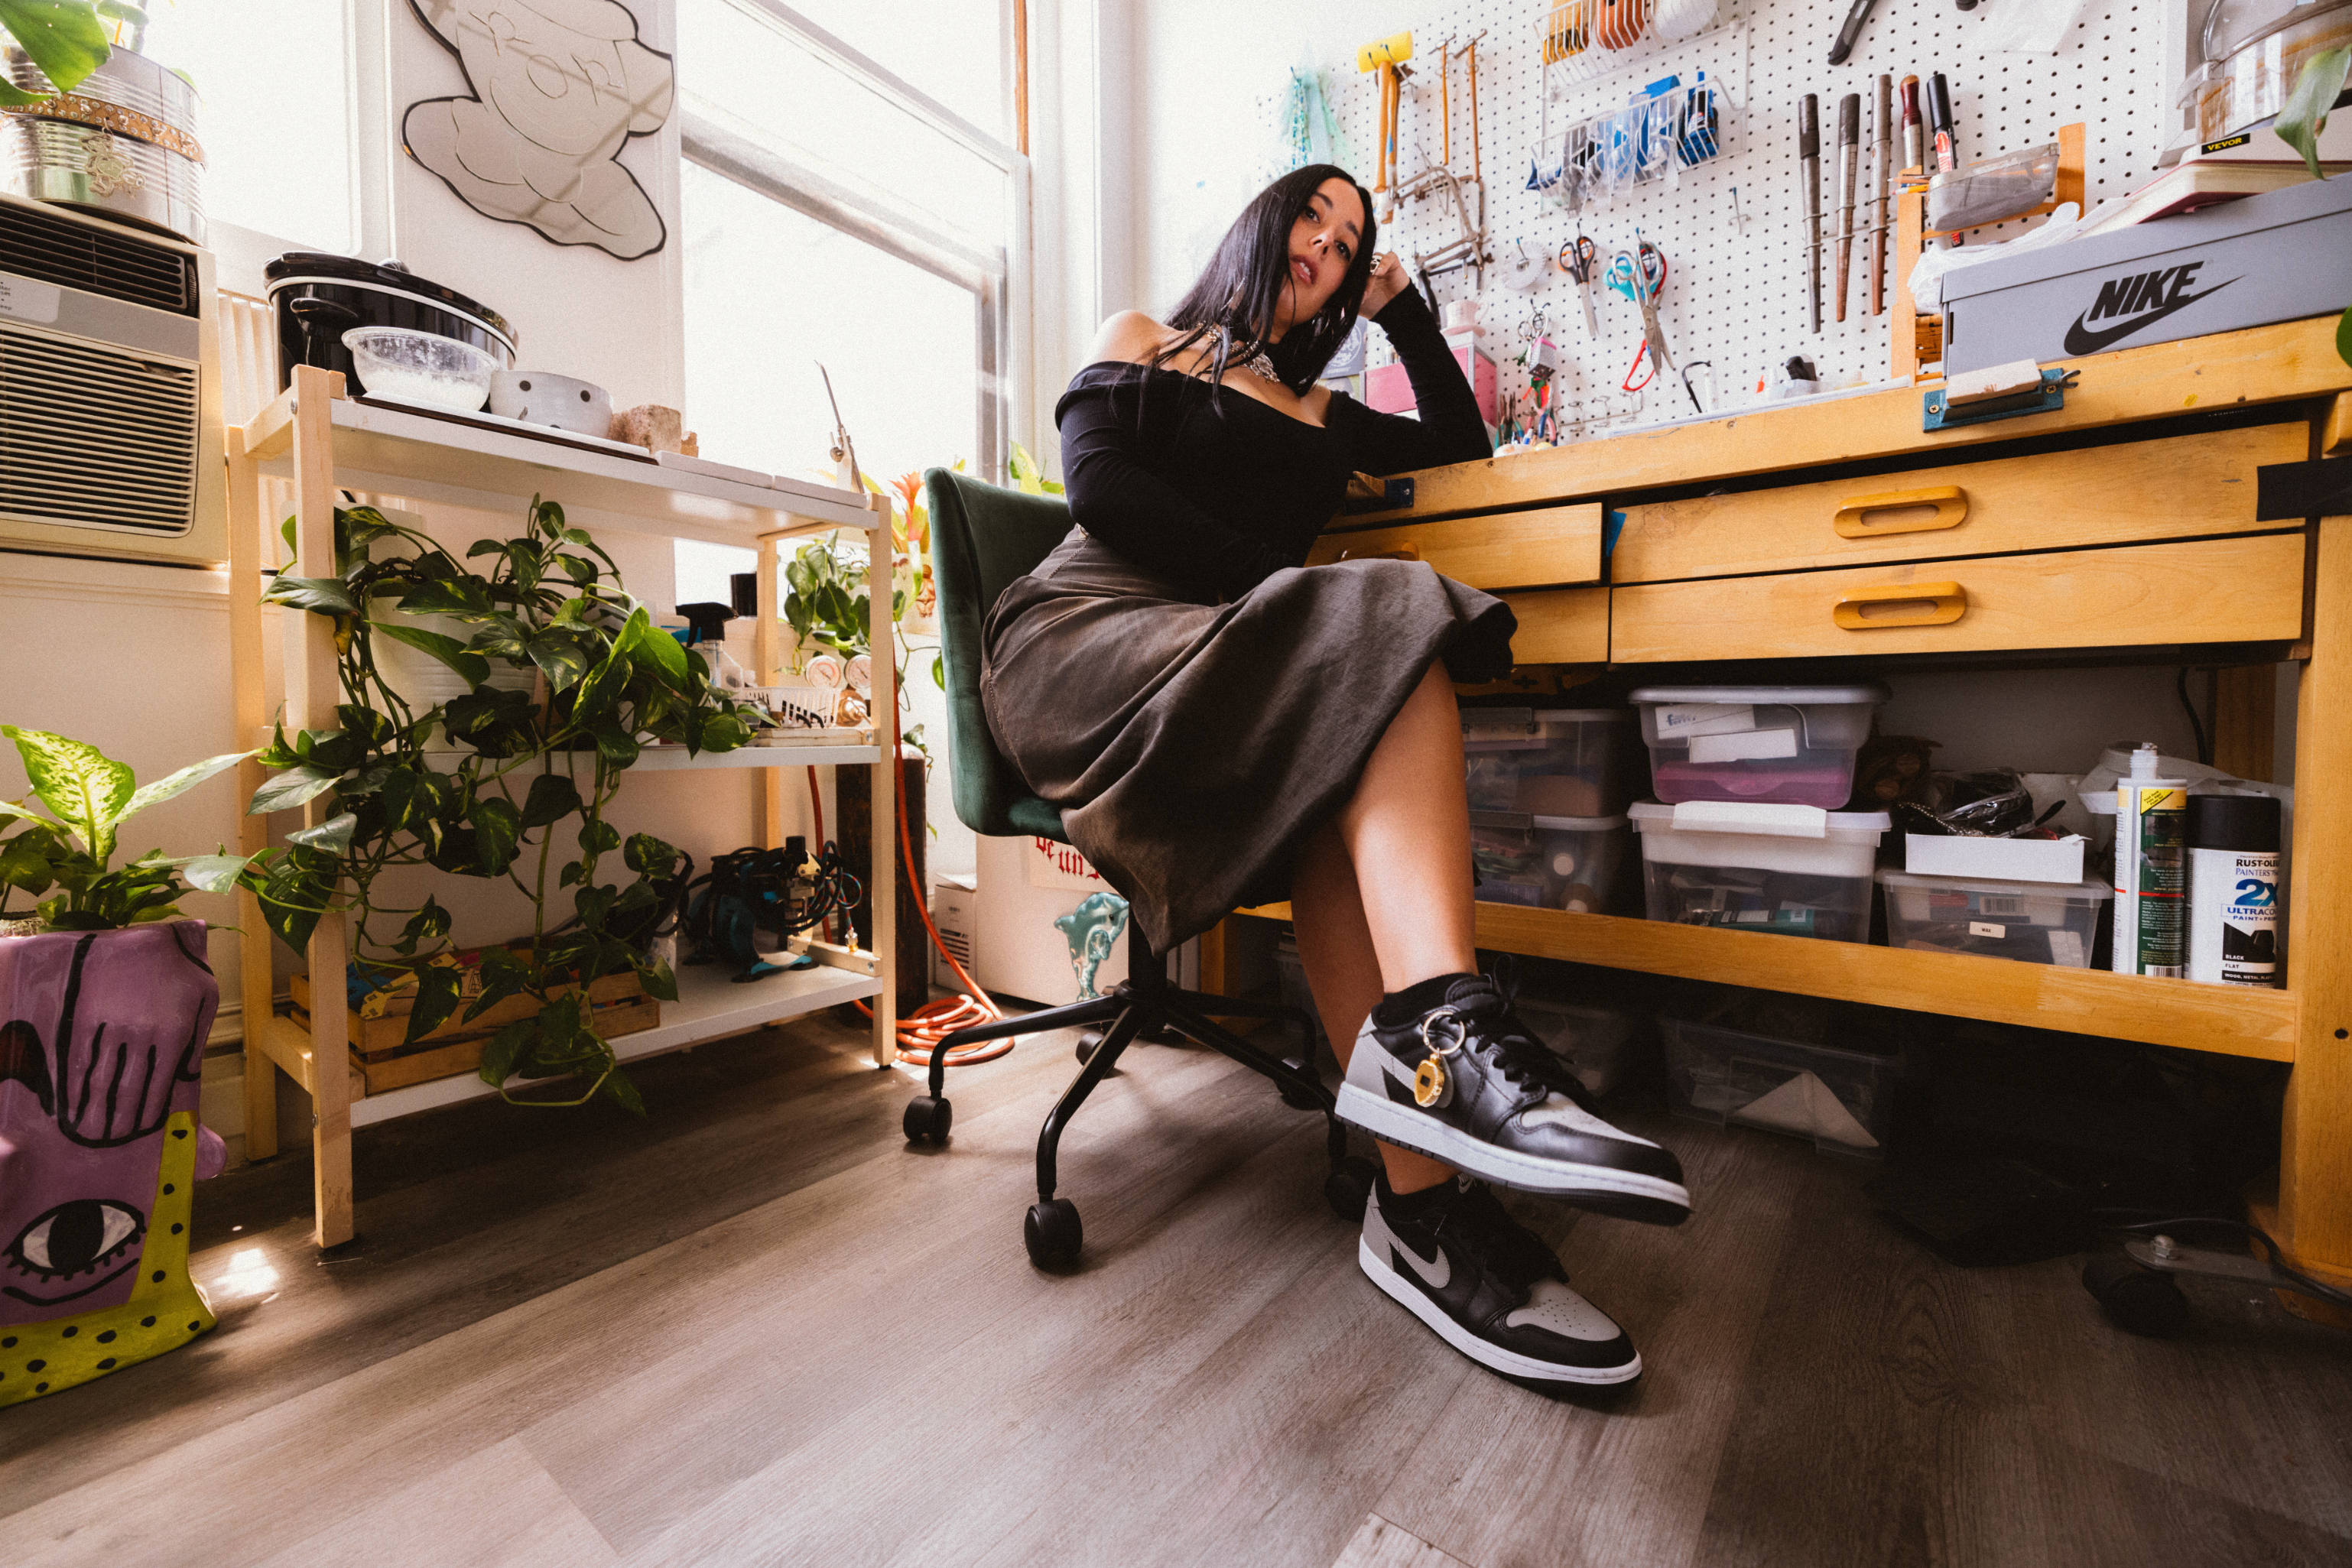 Person sitting by a desk with Nike sneakers on display, surrounded by art supplies and plants